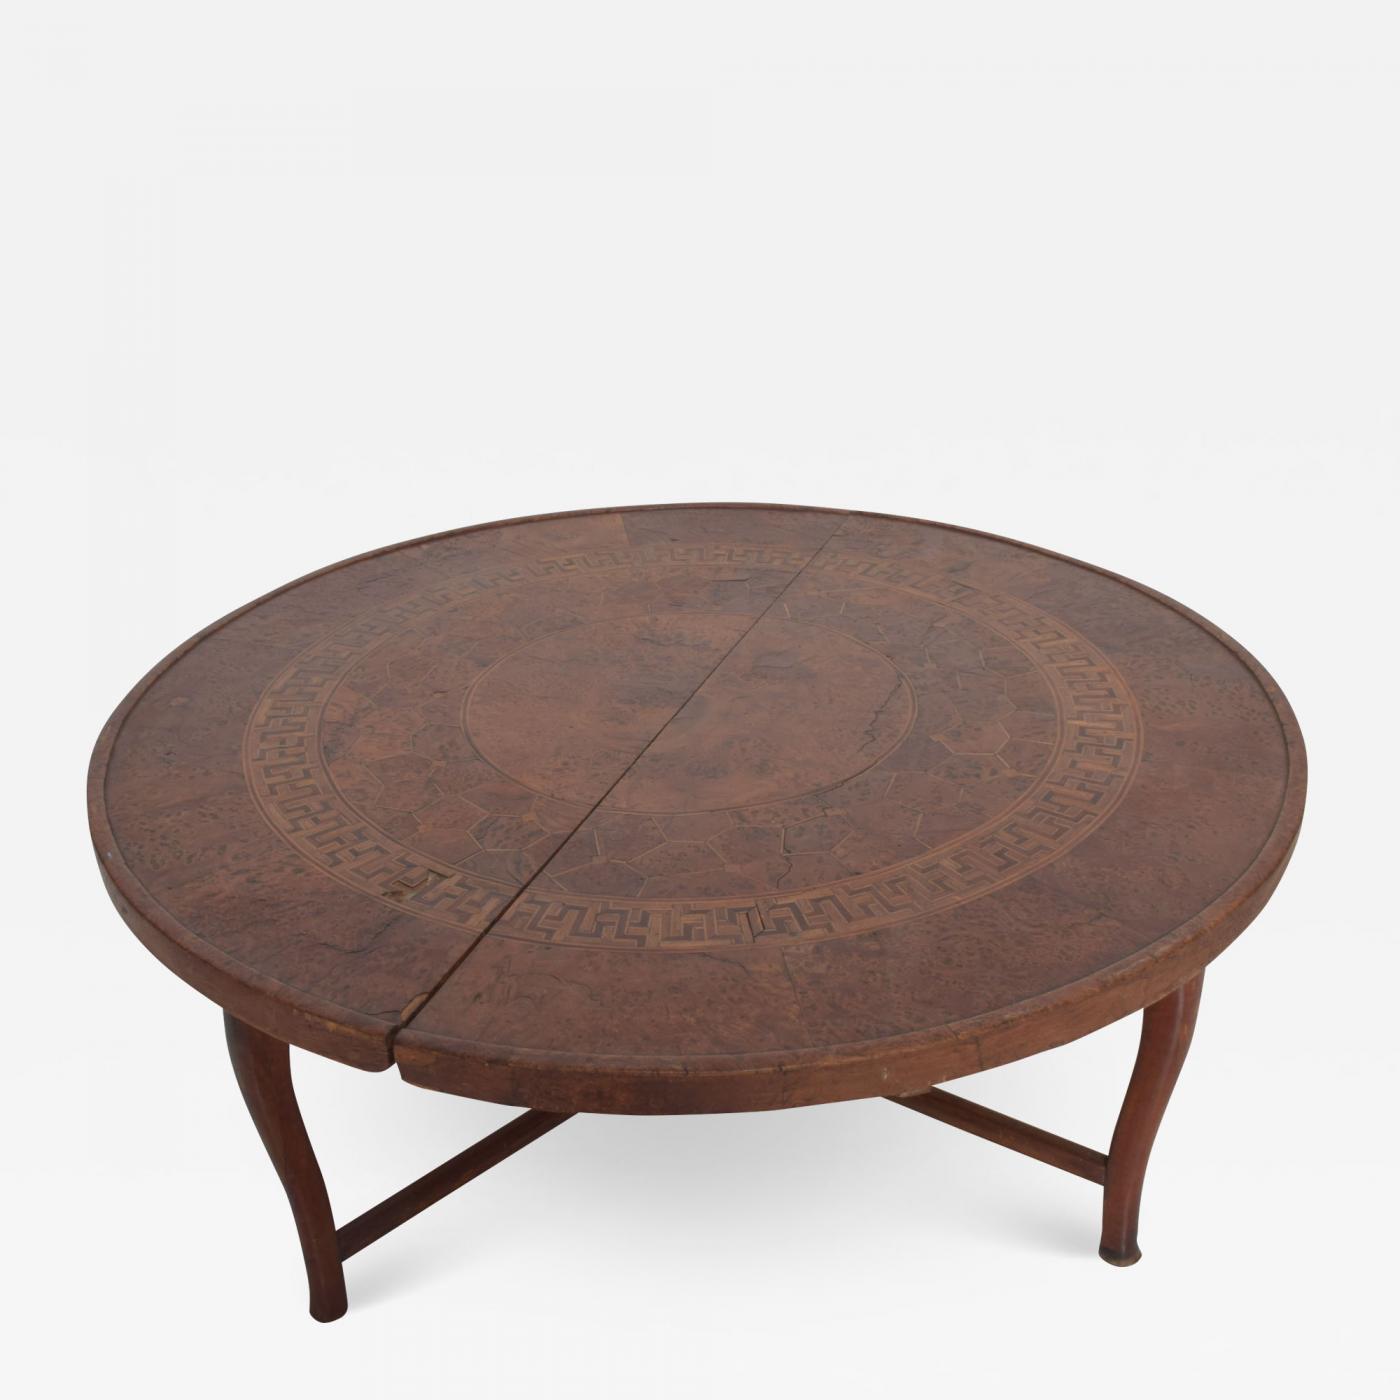 Antique Moroccan Round Coffee Table, Round Wooden Moroccan Coffee Table